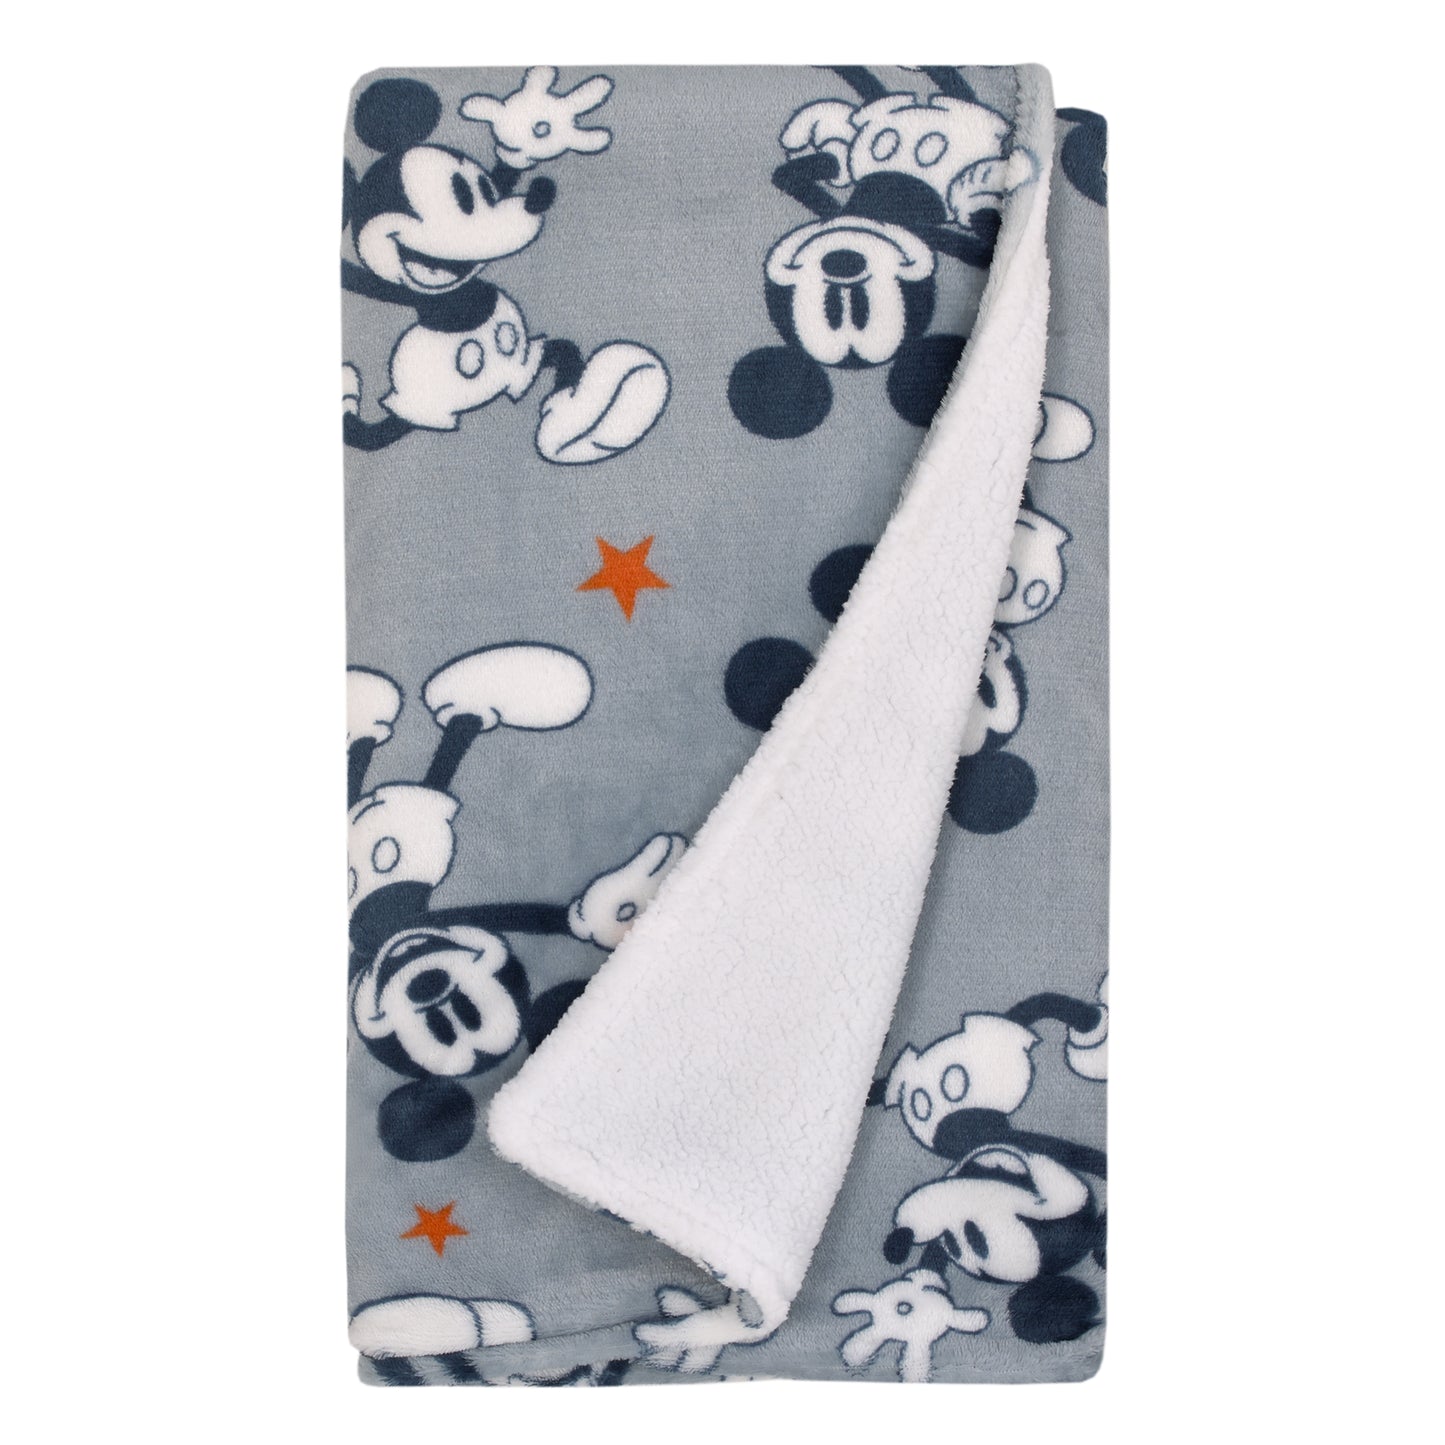 Disney Mickey Mouse Gray, Navy, White and Red Stars Super Soft Sherpa Baby Blanket